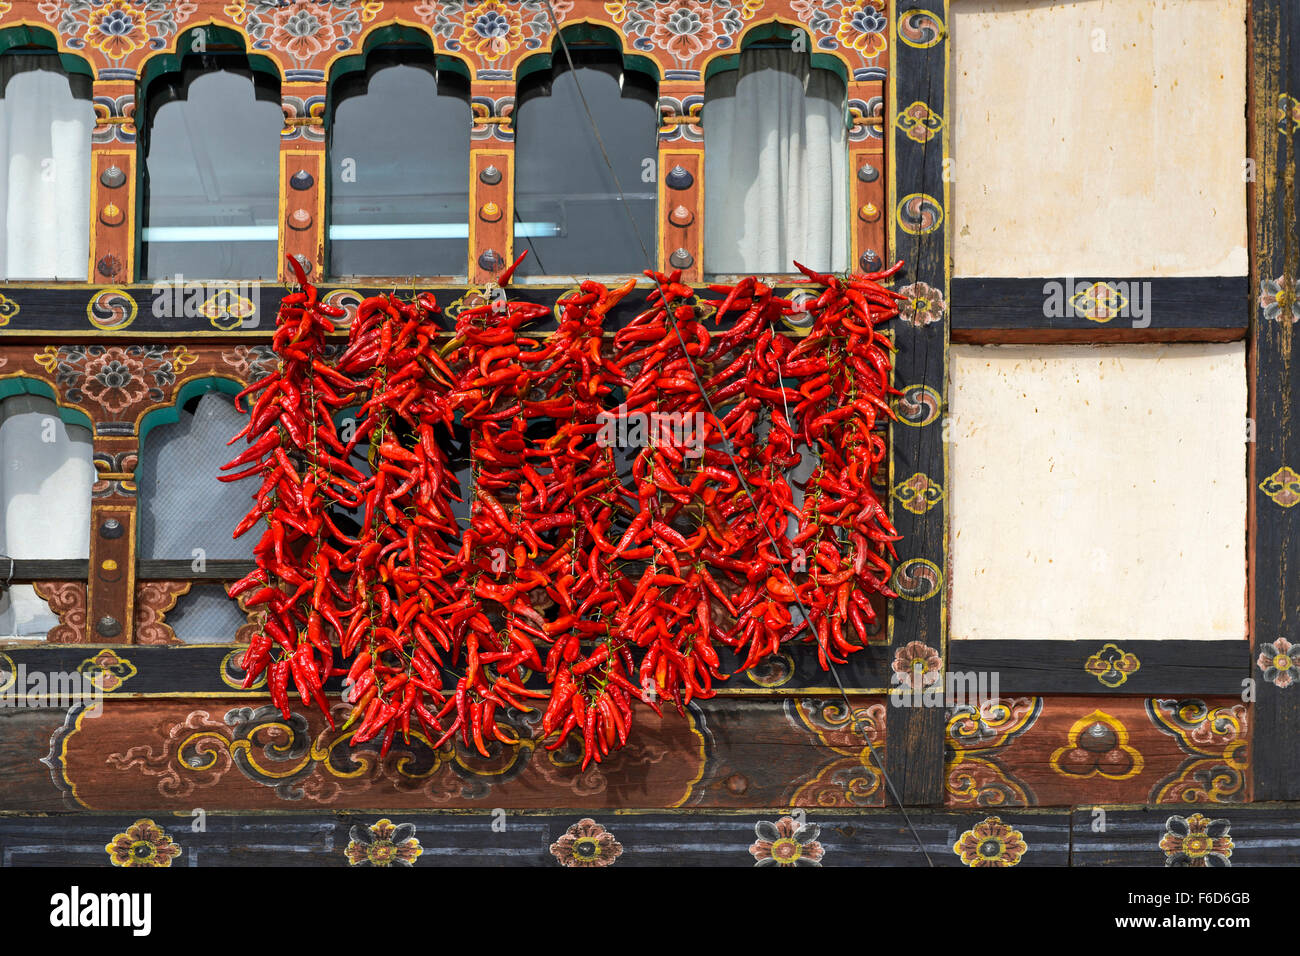 Red chili pepper pods hanging at a window for drying, Paro, Bhutan Stock Photo